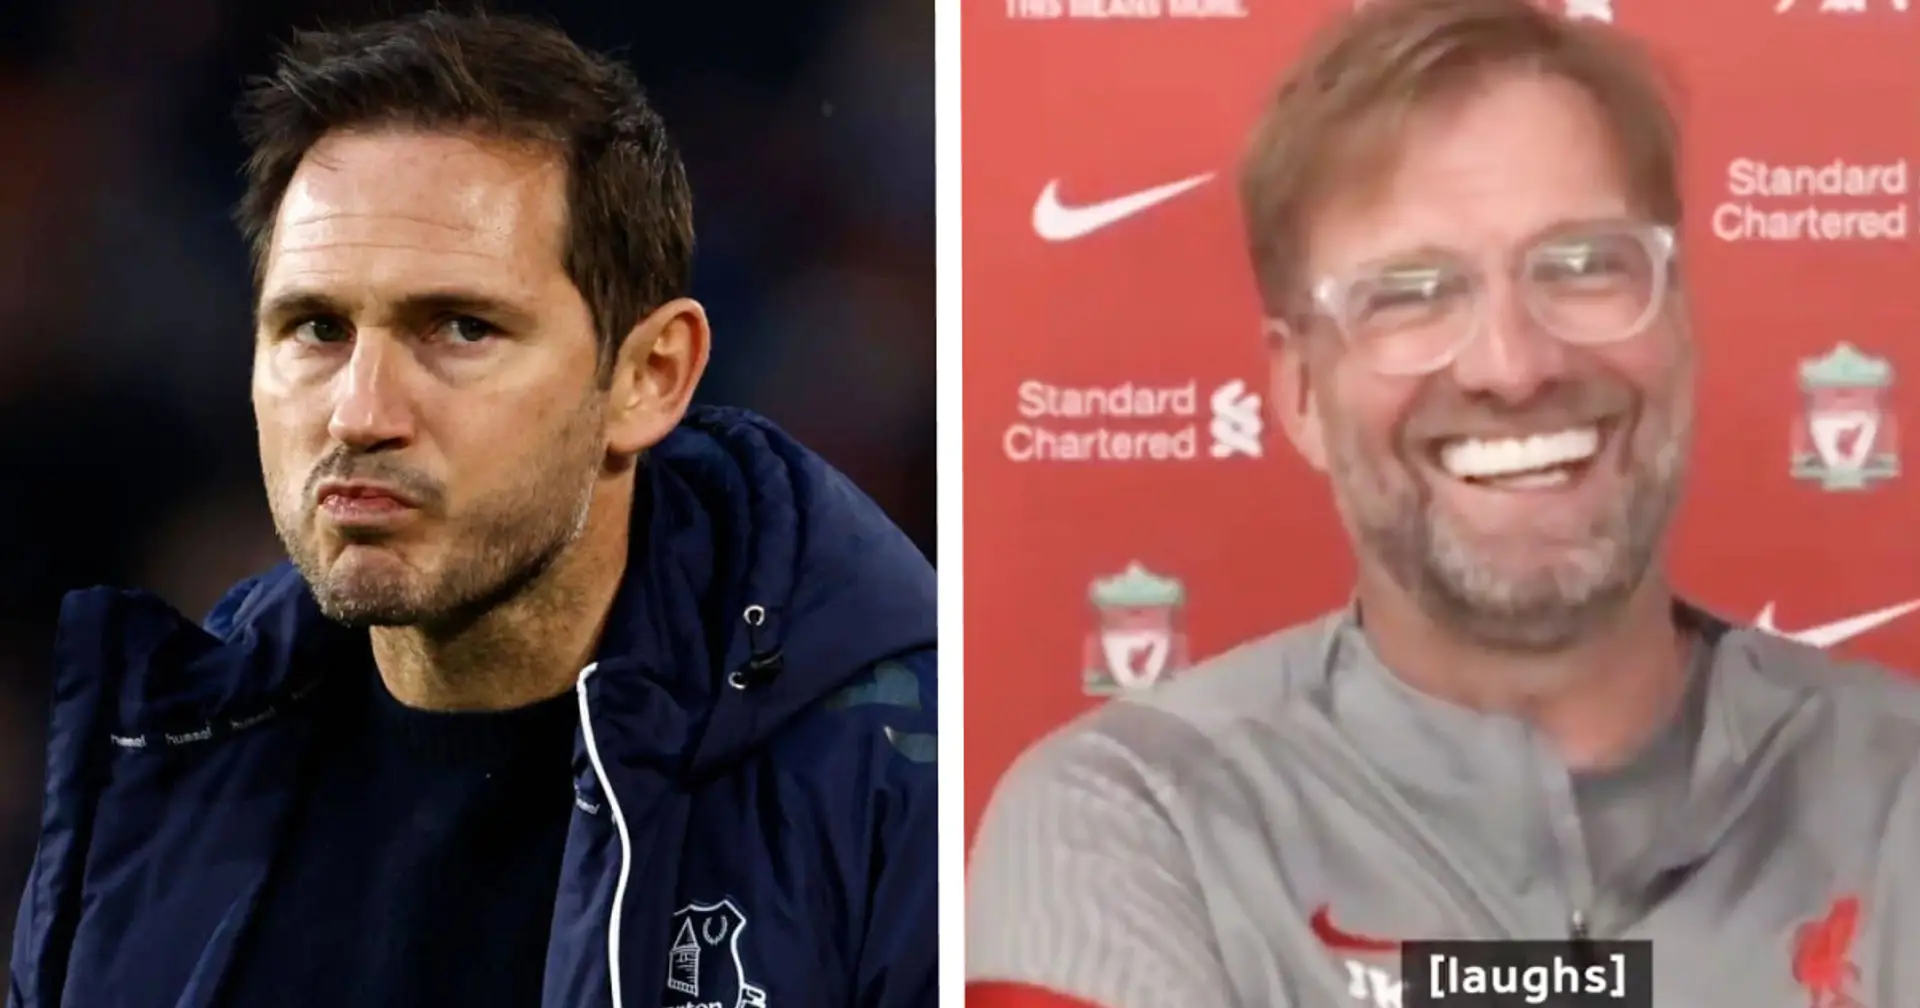 Frank Lampard sacked: Next Everton manager to be 8th since Klopp became Liverpool coach